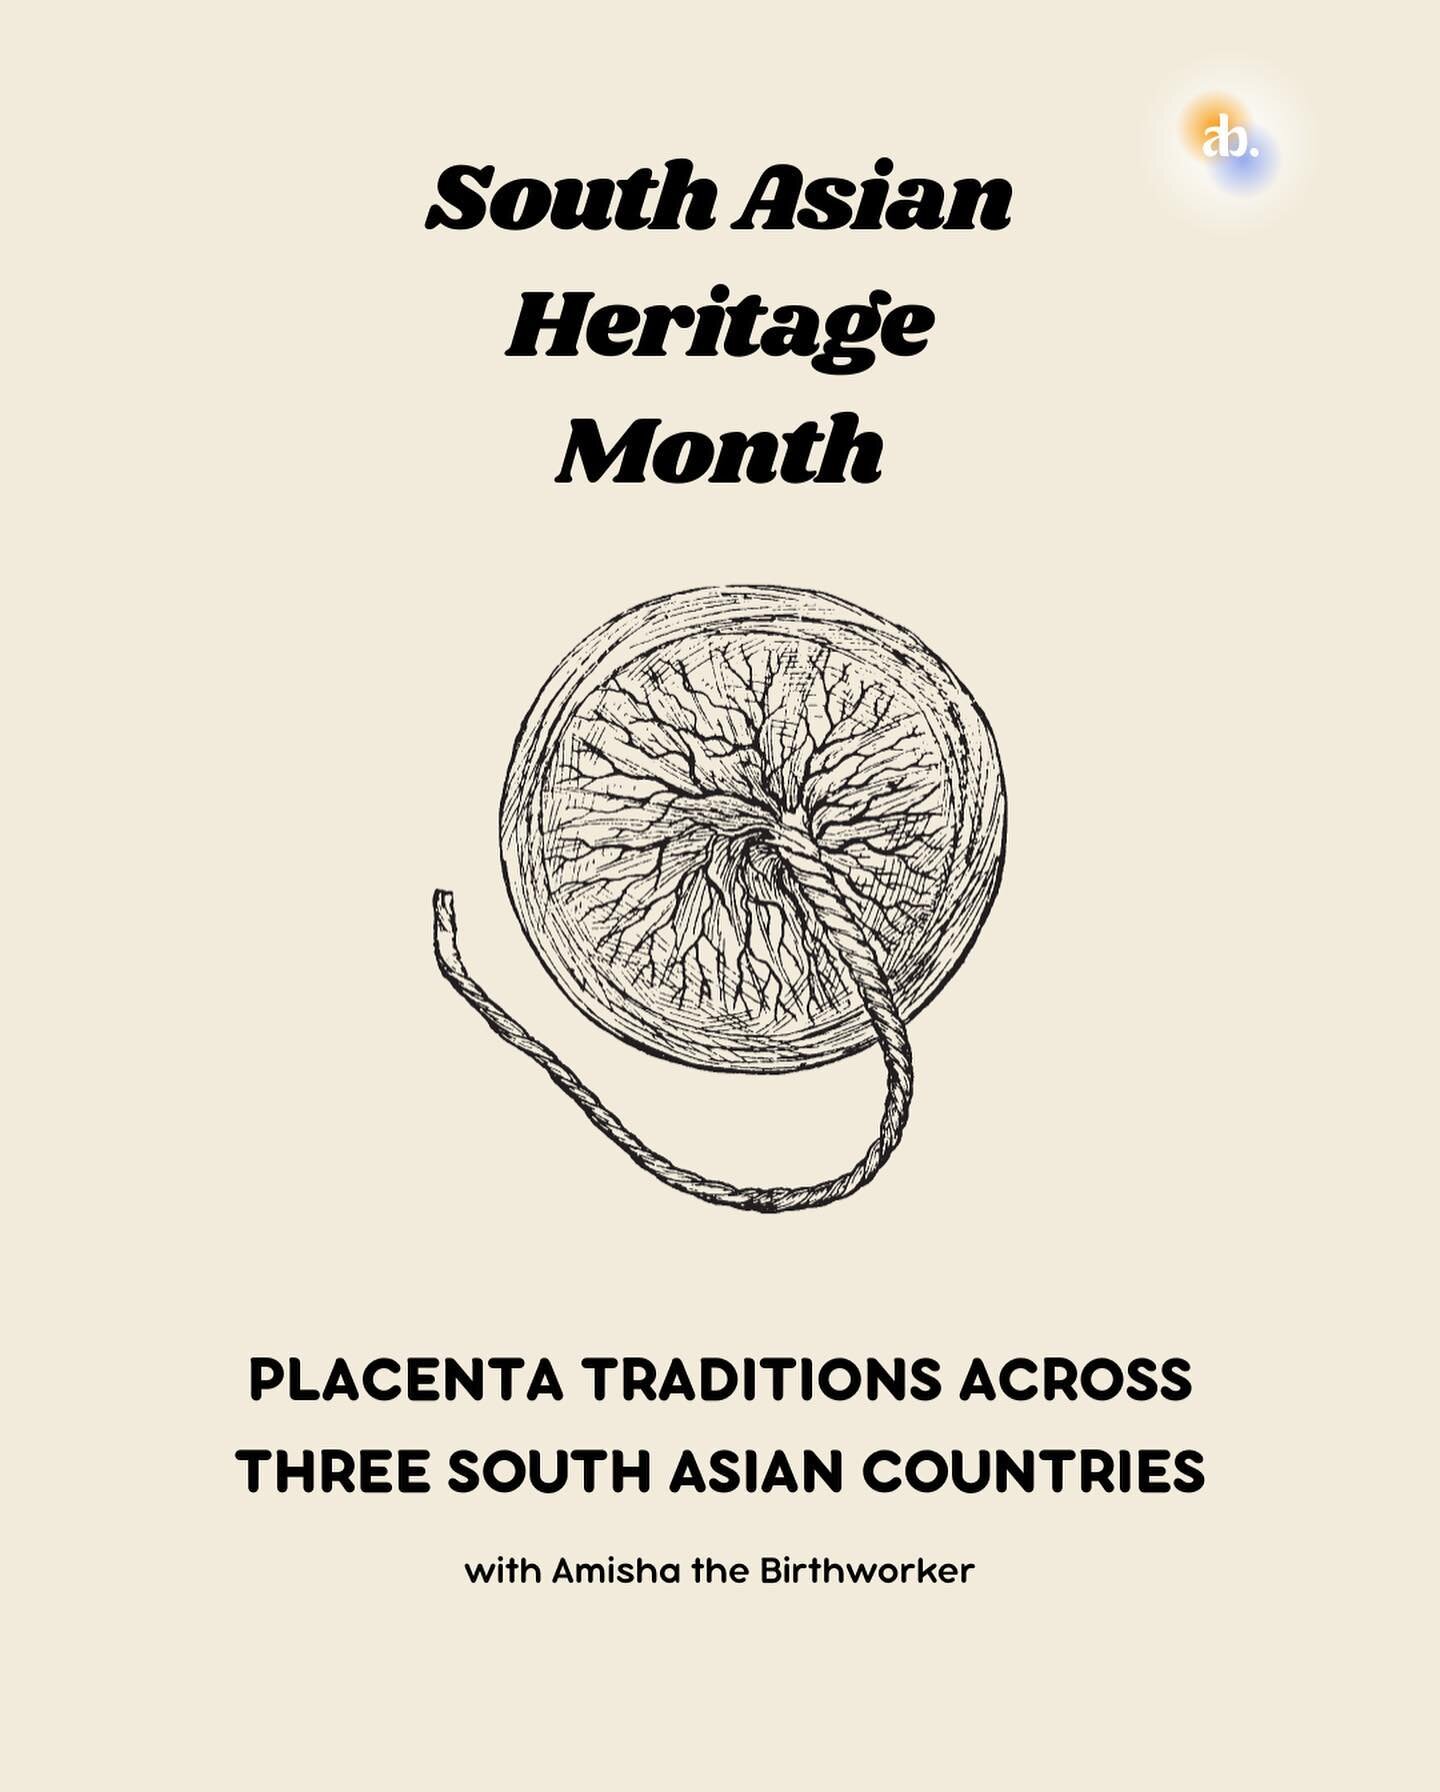 Placenta traditions across 3 South Asian countries 

As I began my journey into birthwork, I realised that eating the placenta is fairly common and has roots in several cultures. However, from speaking to south asian elders and doing my own research,